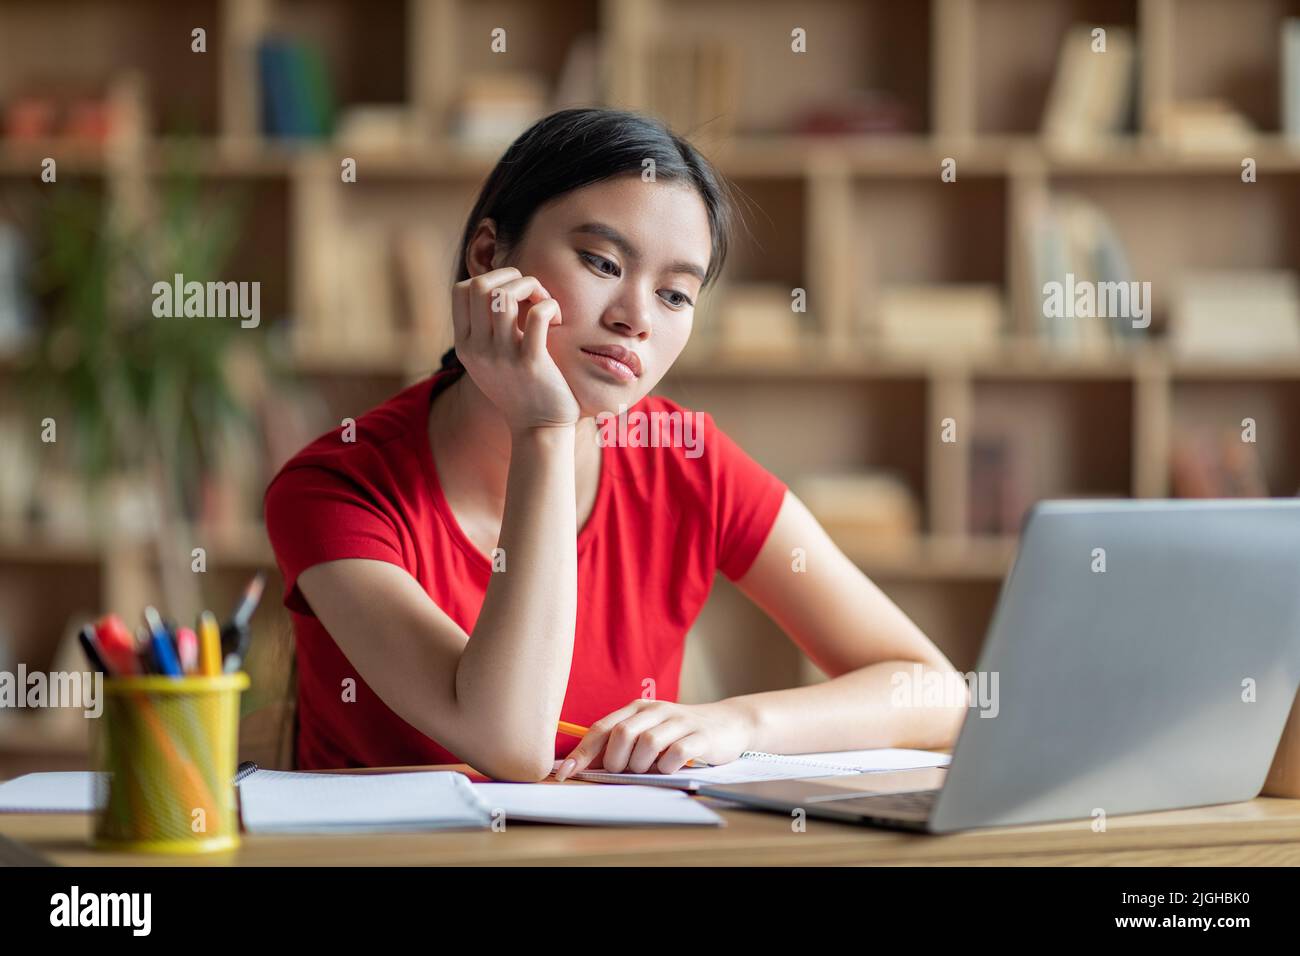 Boring sad adolescent asian female student watching video lesson, lecture on computer in room interior Stock Photo